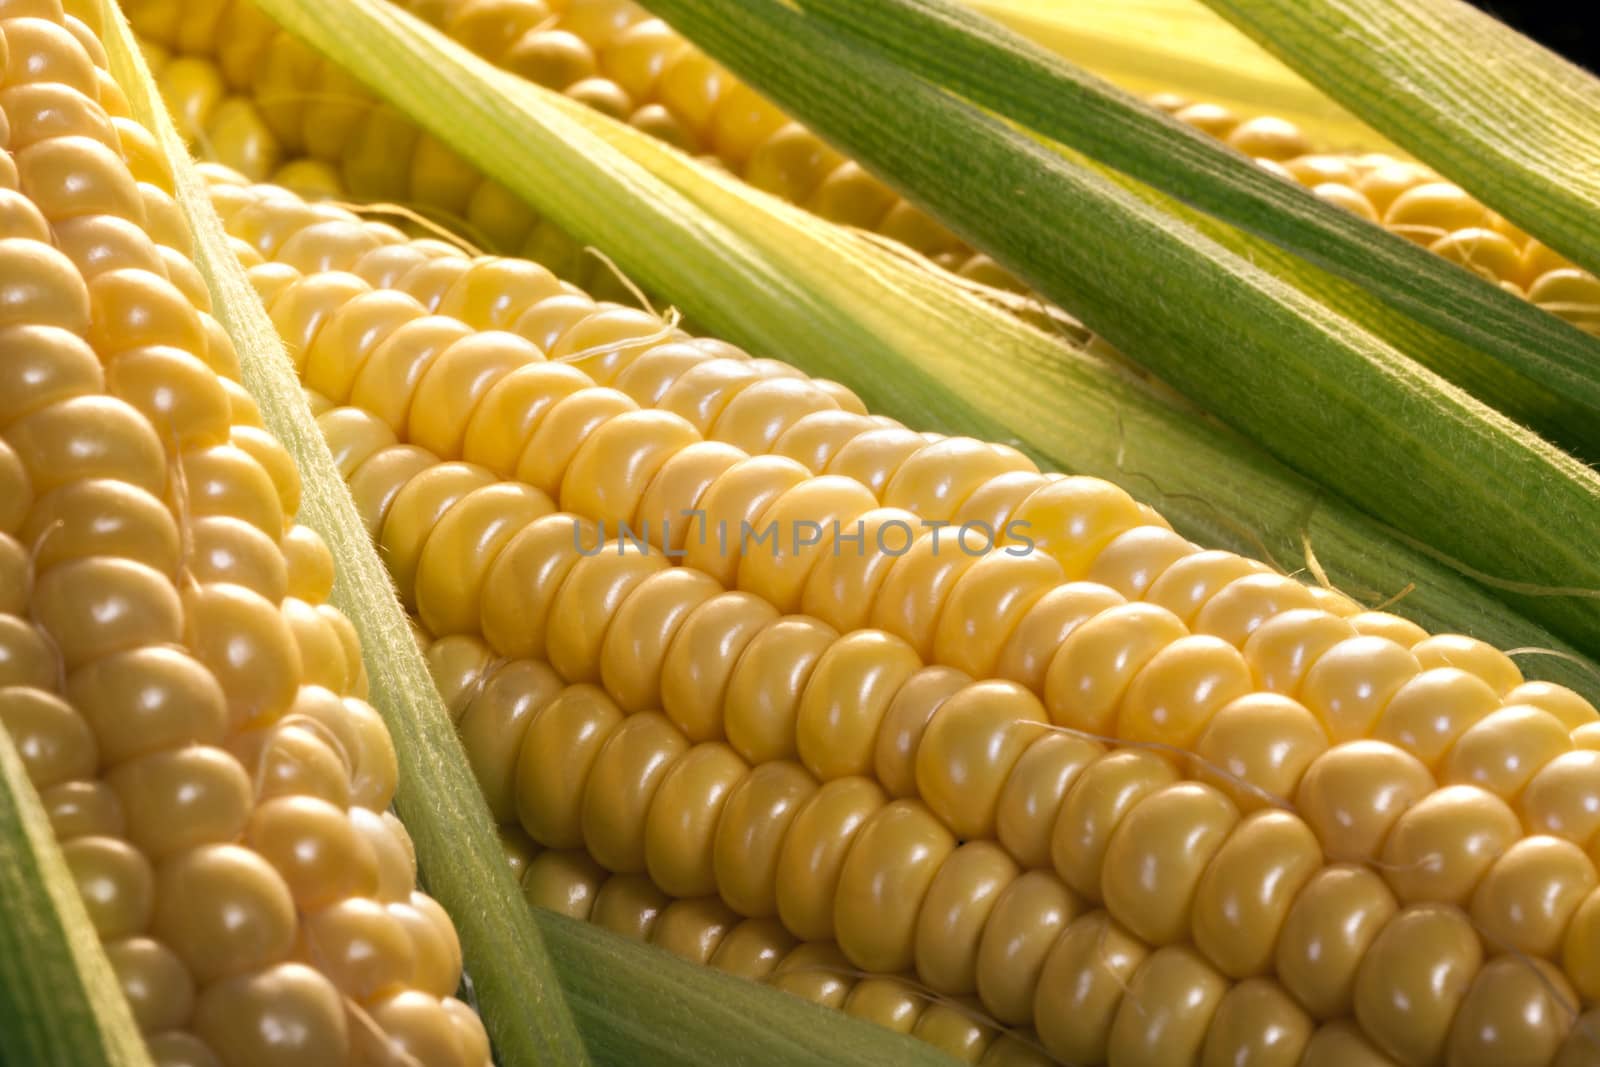 Corn on the cob is a culinary term used for a cooked ear of freshly picked maize from a cultivar of sweet corn. The ear is picked while the endosperm is in the "milk stage" so that the kernels are still tender. 